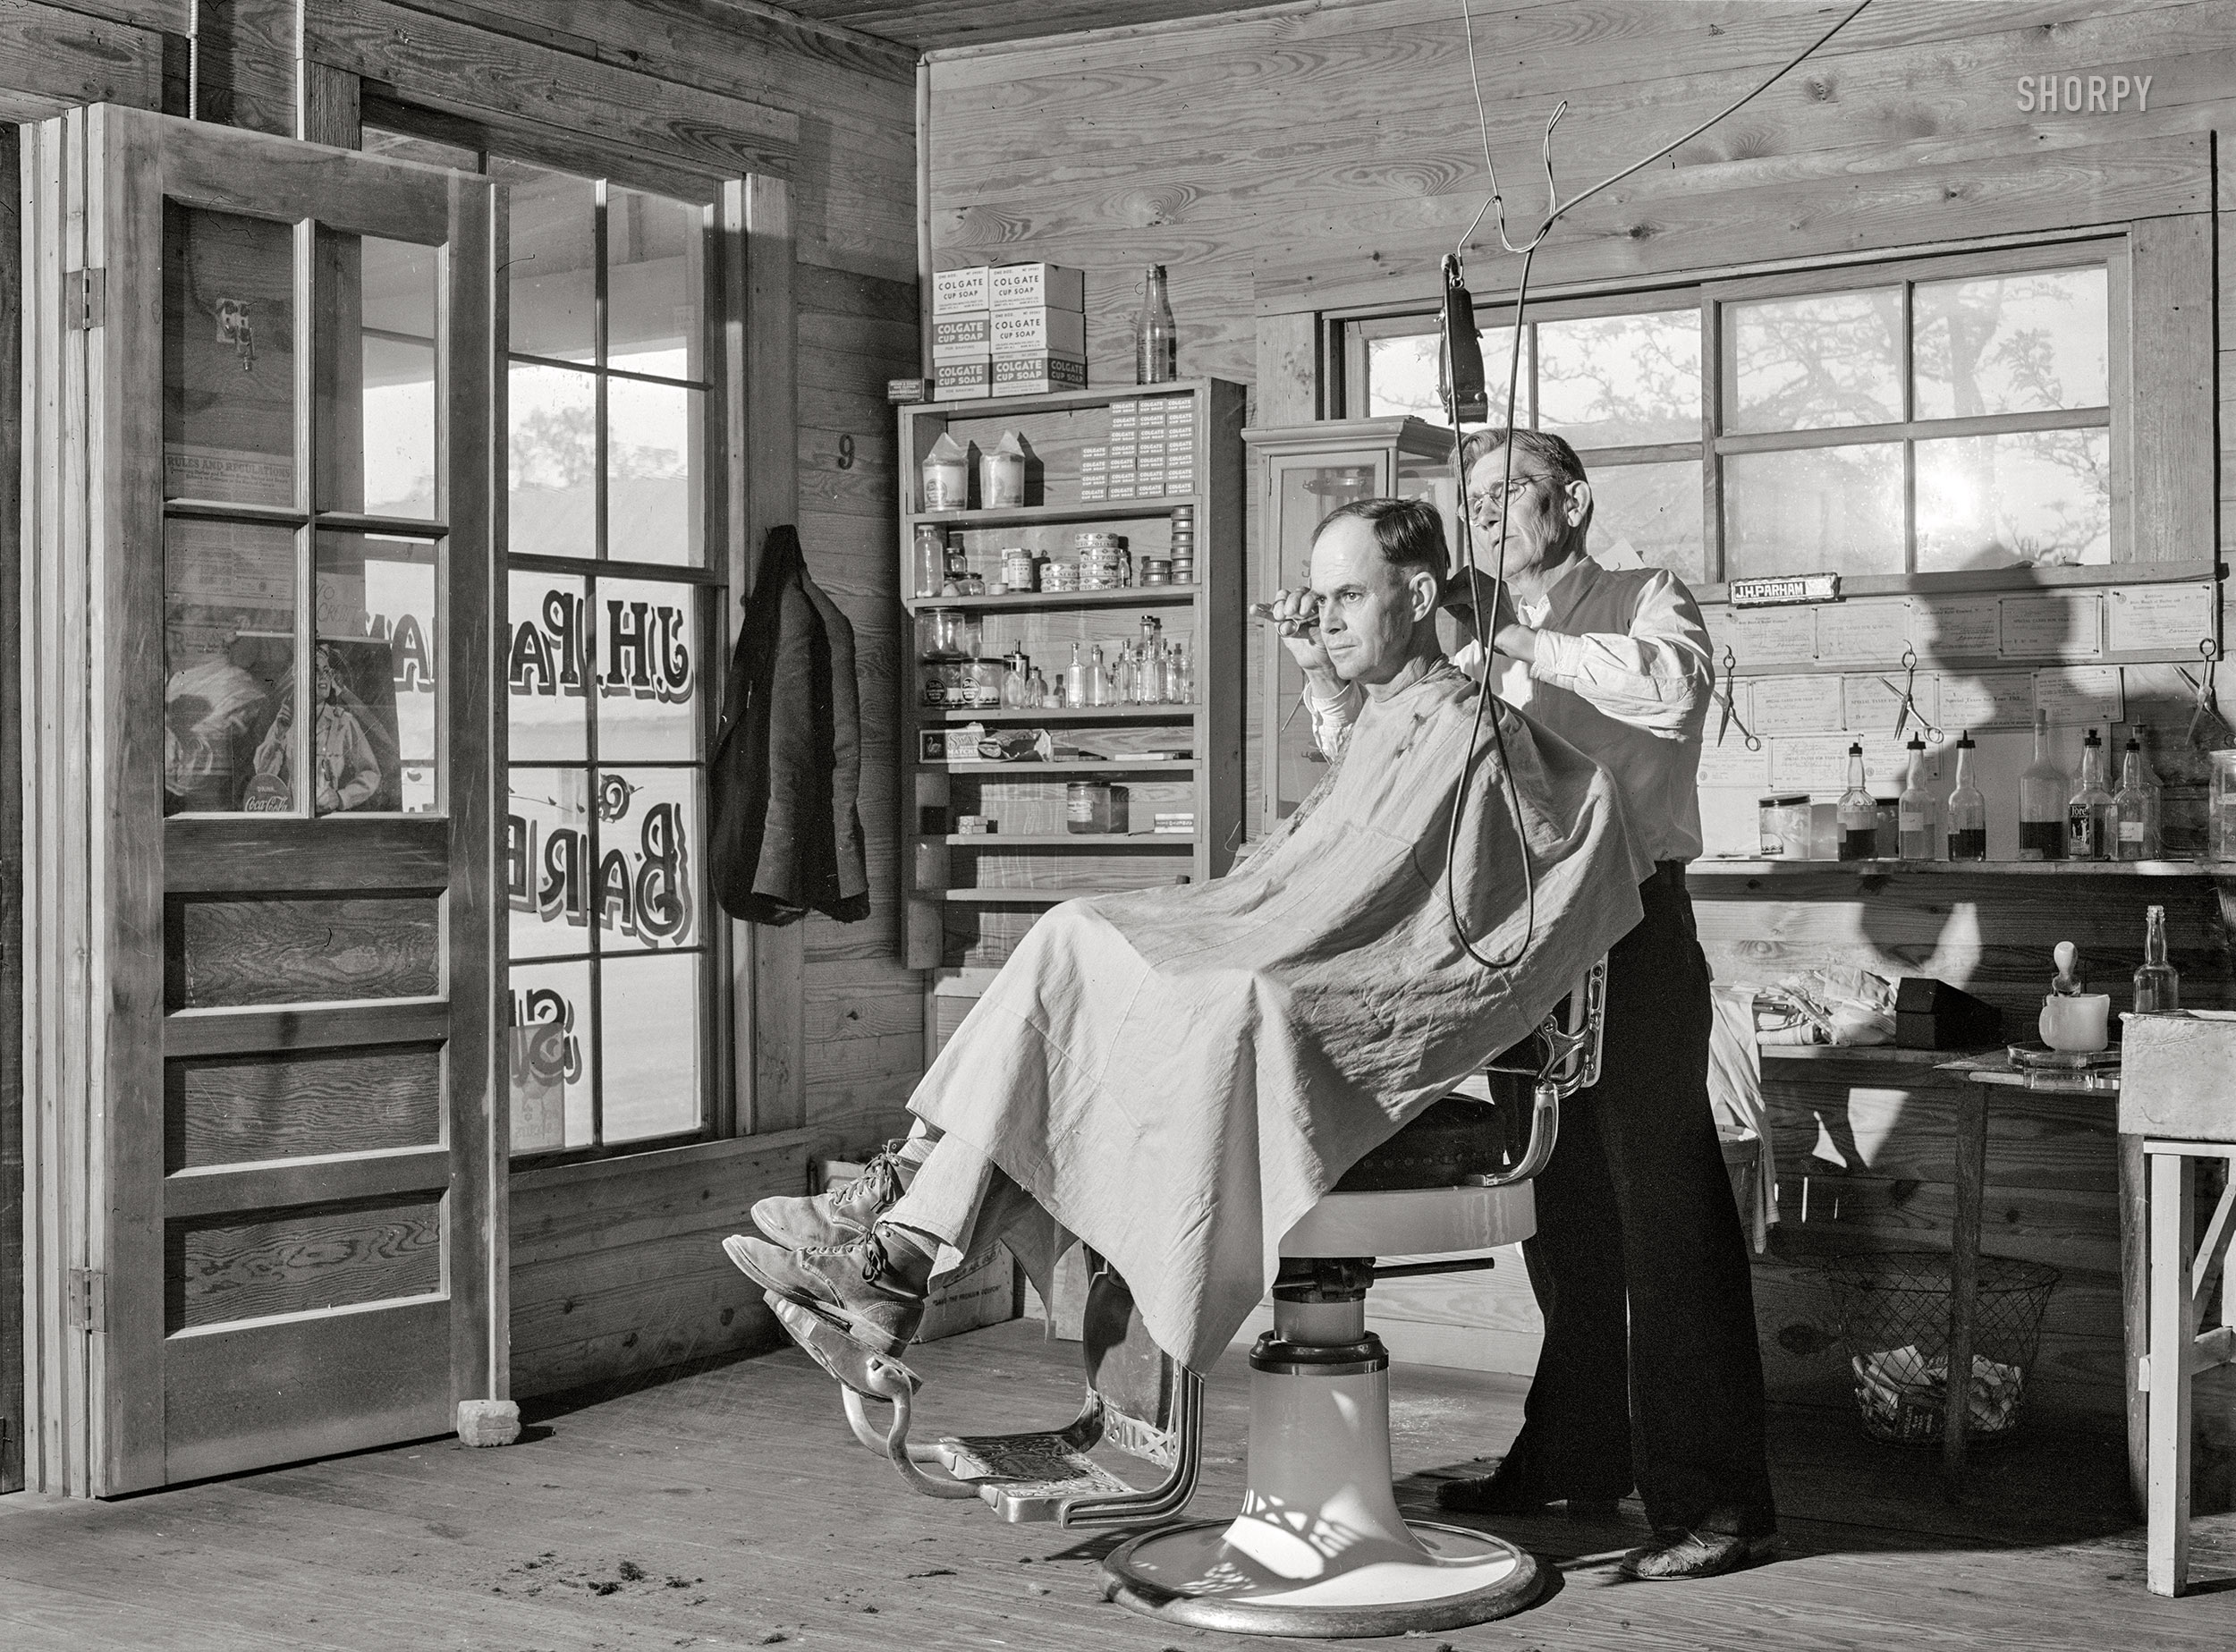 April 1941. "Mr. J. H. Parham, barber and notary public, in his shop in Centralhatchee, Heard County, Georgia." Photo by Jack Delano for the Farm Security Administration. View full size.